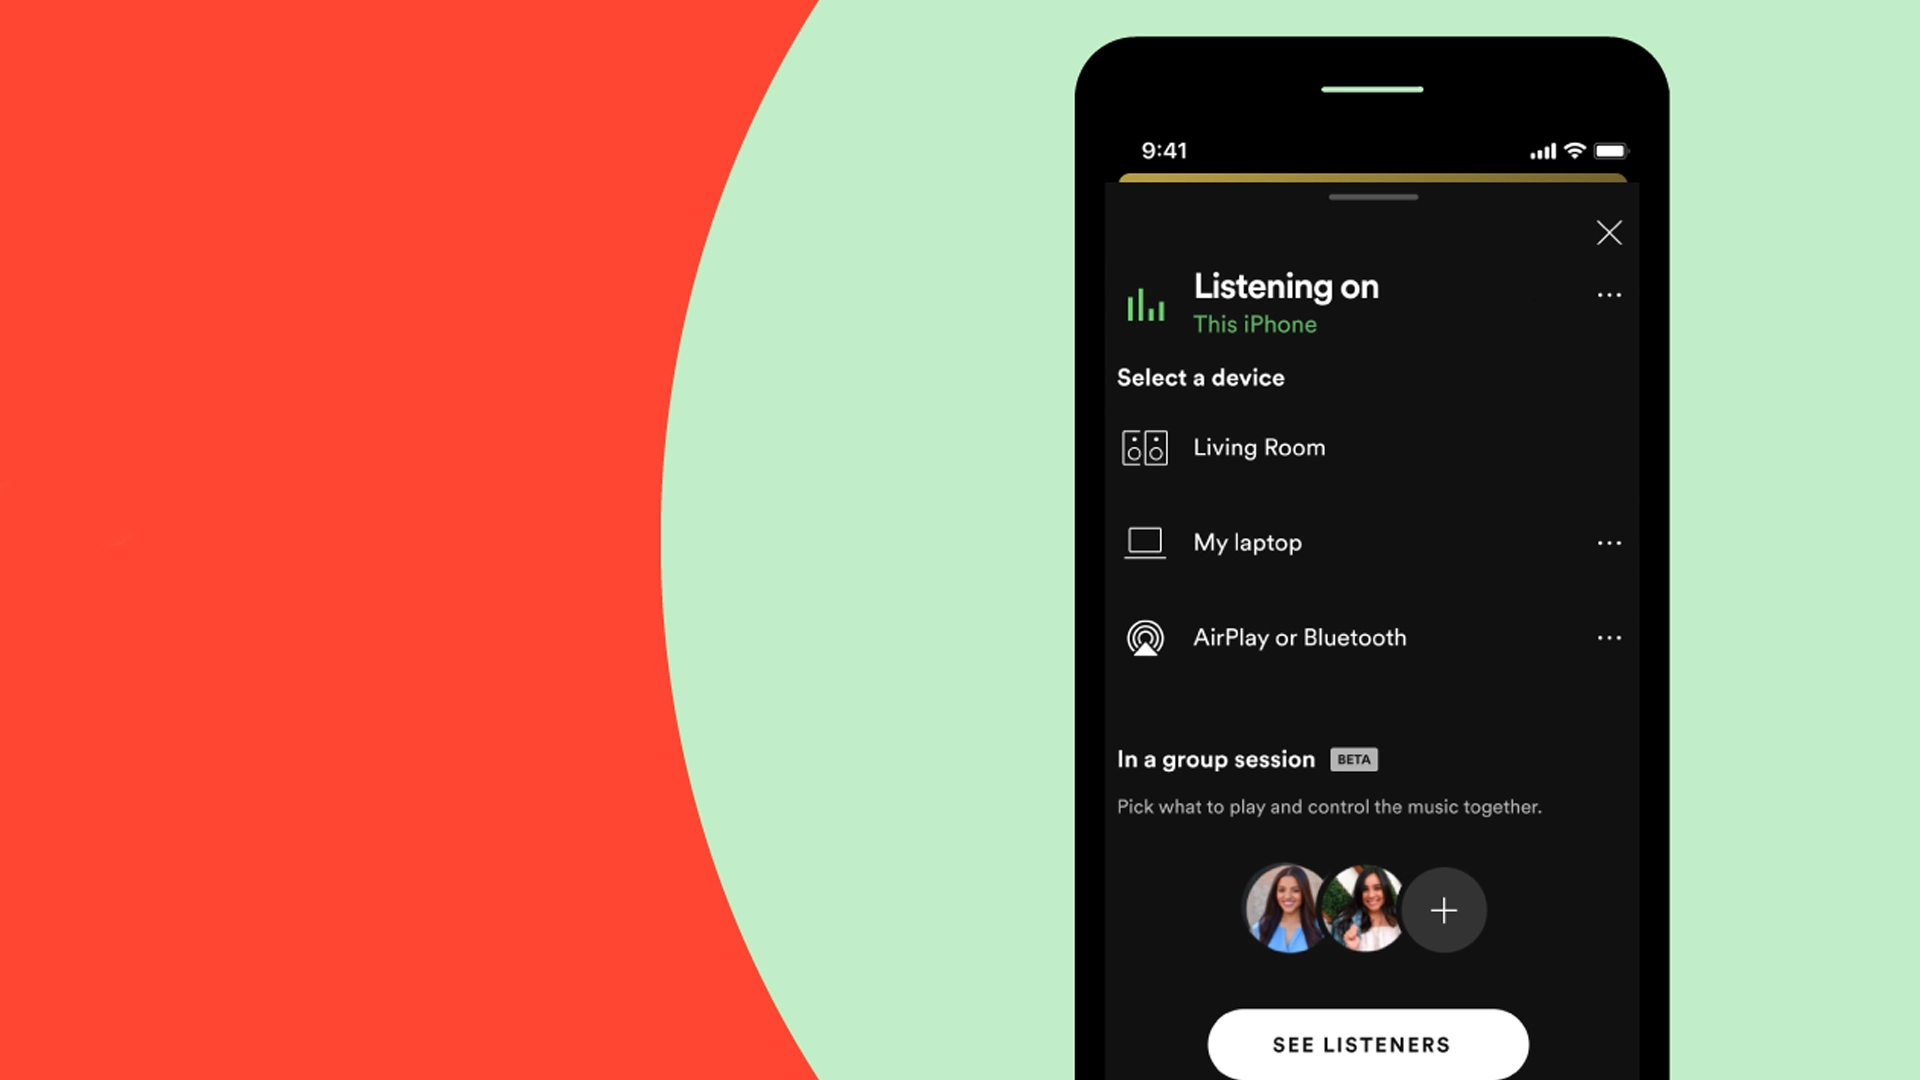 A Spotify group session promo image without the beta tag